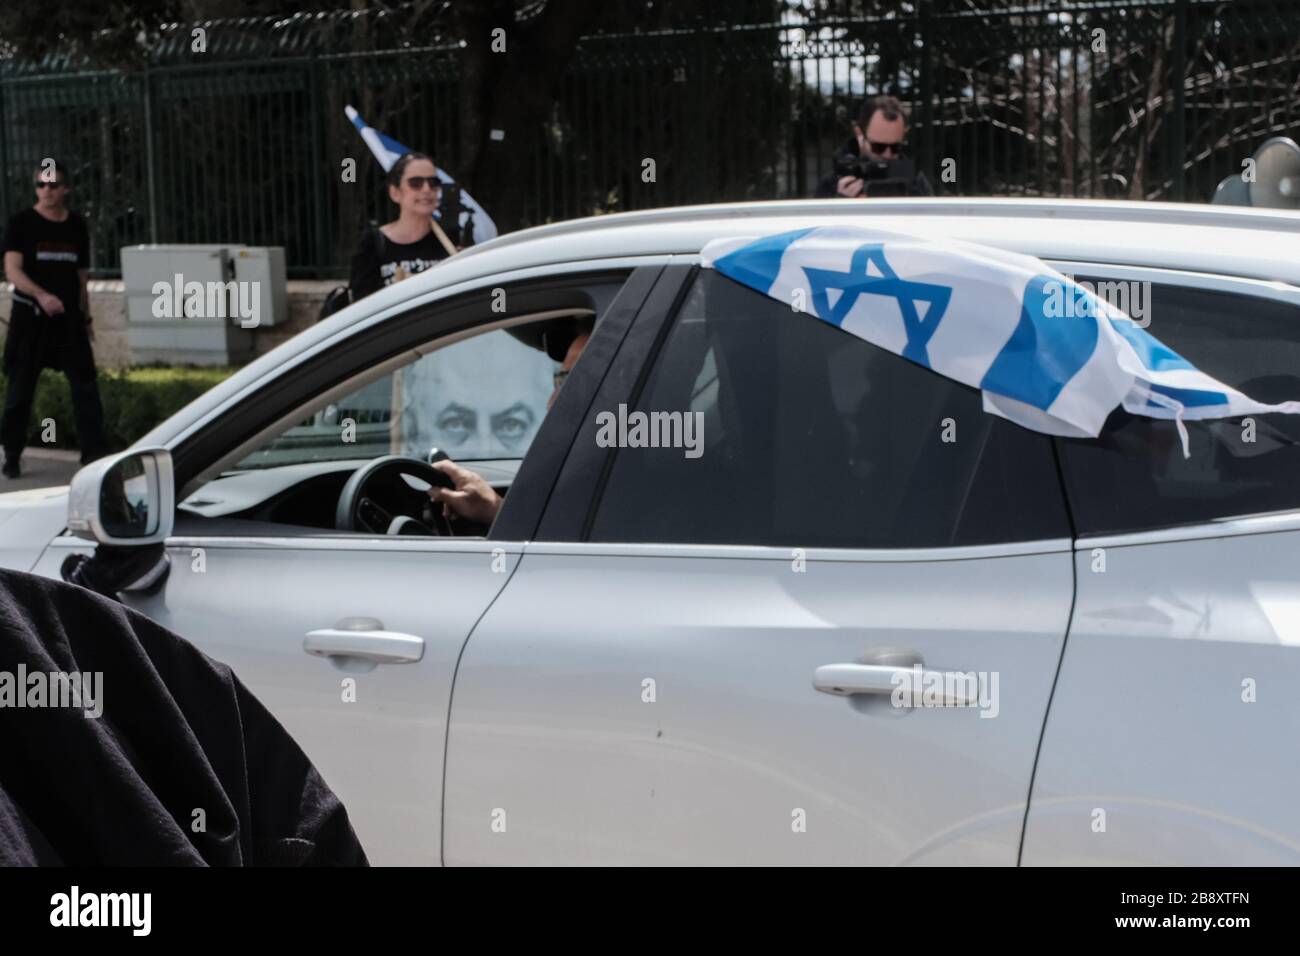 Jerusalem, Israel. 23rd Mar, 2020. The Black Flags Movement brings a convoy of over 1,000 cars to the Knesset, the Israeli Parliament, waving Israeli and black flags, protesting the Netanyahu government's alleged attempt to manipulate legislation and abuse Coronavirus emergency measures in an attempt to ‘hijack' democracy for political and personal benefits. A Supreme Court appeal is now underway aiming to restore the full powers of Parliament, blocked from functioning by Knesset Speaker, Edelstein, a Netanyahu ally. Credit: Nir Alon/Alamy Live News Stock Photo